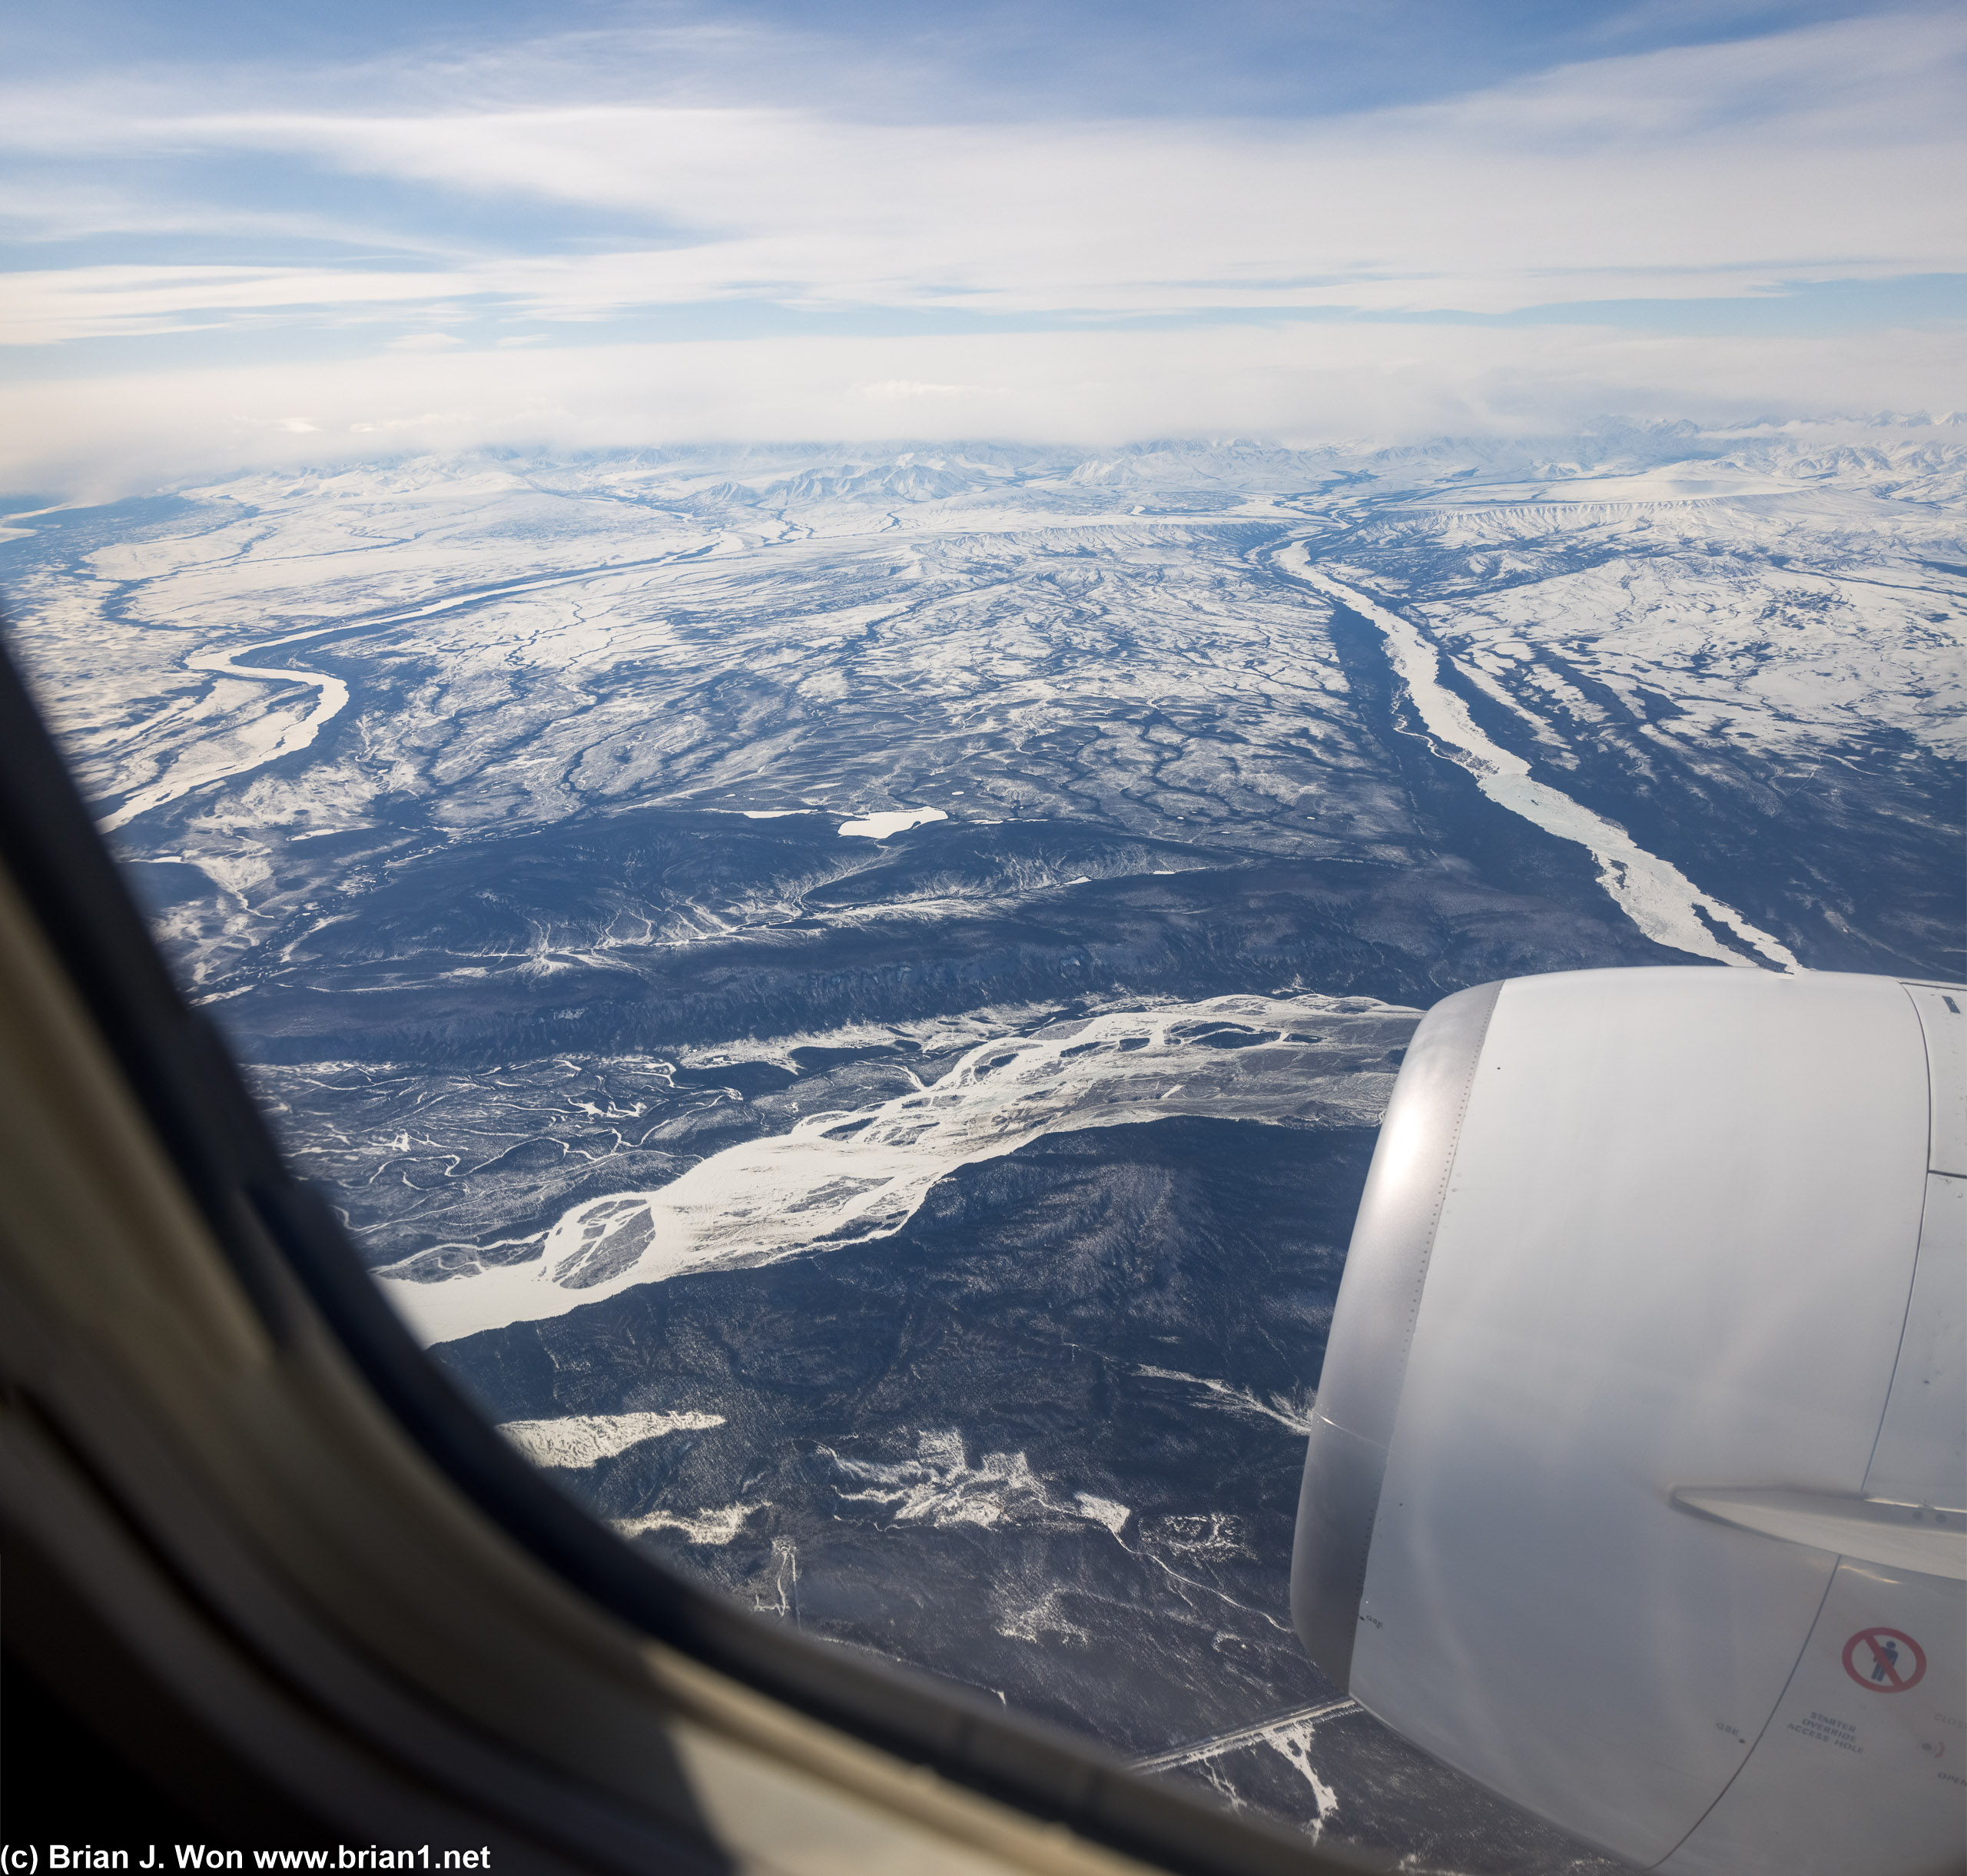 Climbing out of Fairbanks.